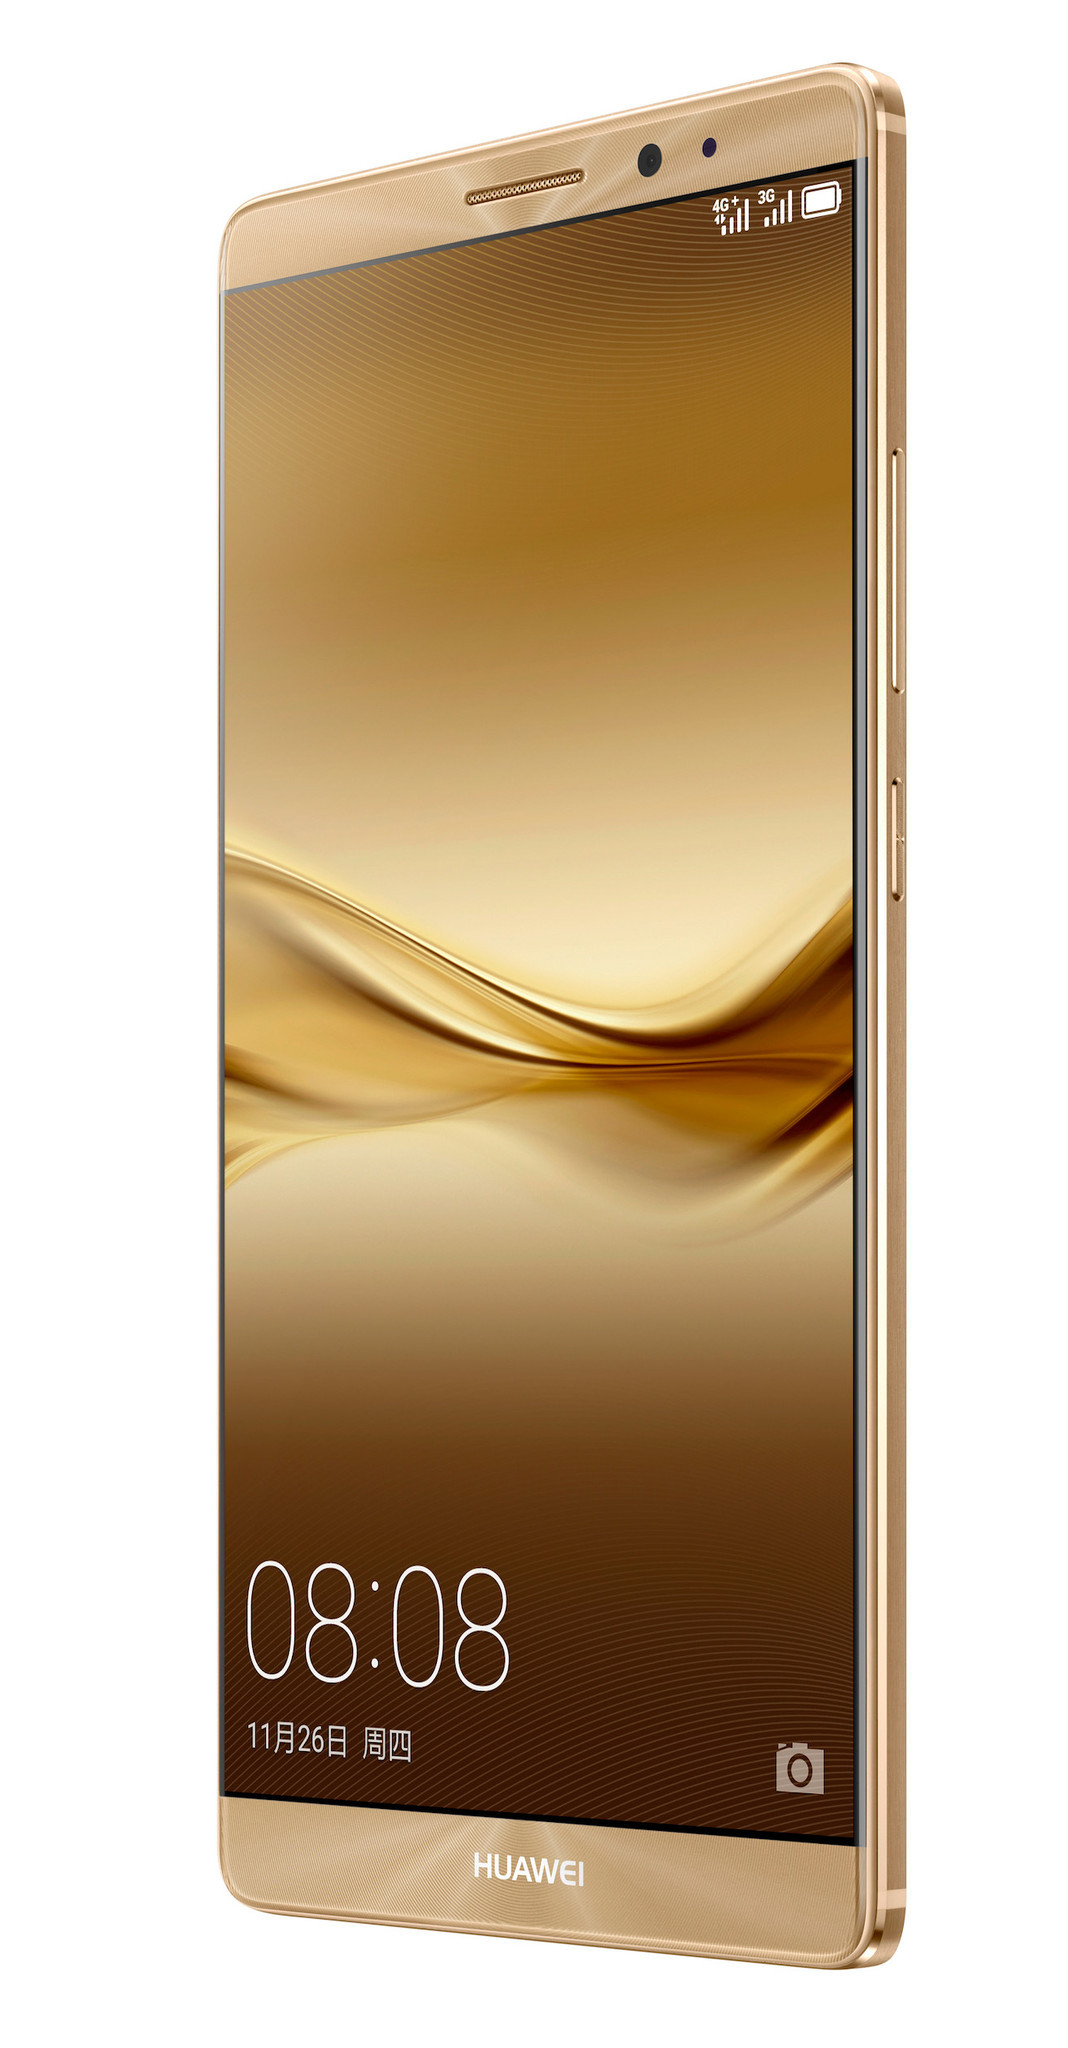 regeling Dag Lodge Huawei Mate 8 unveiled in China; comes with a Kirin 950 chipset and a  6-inch 1080p screen